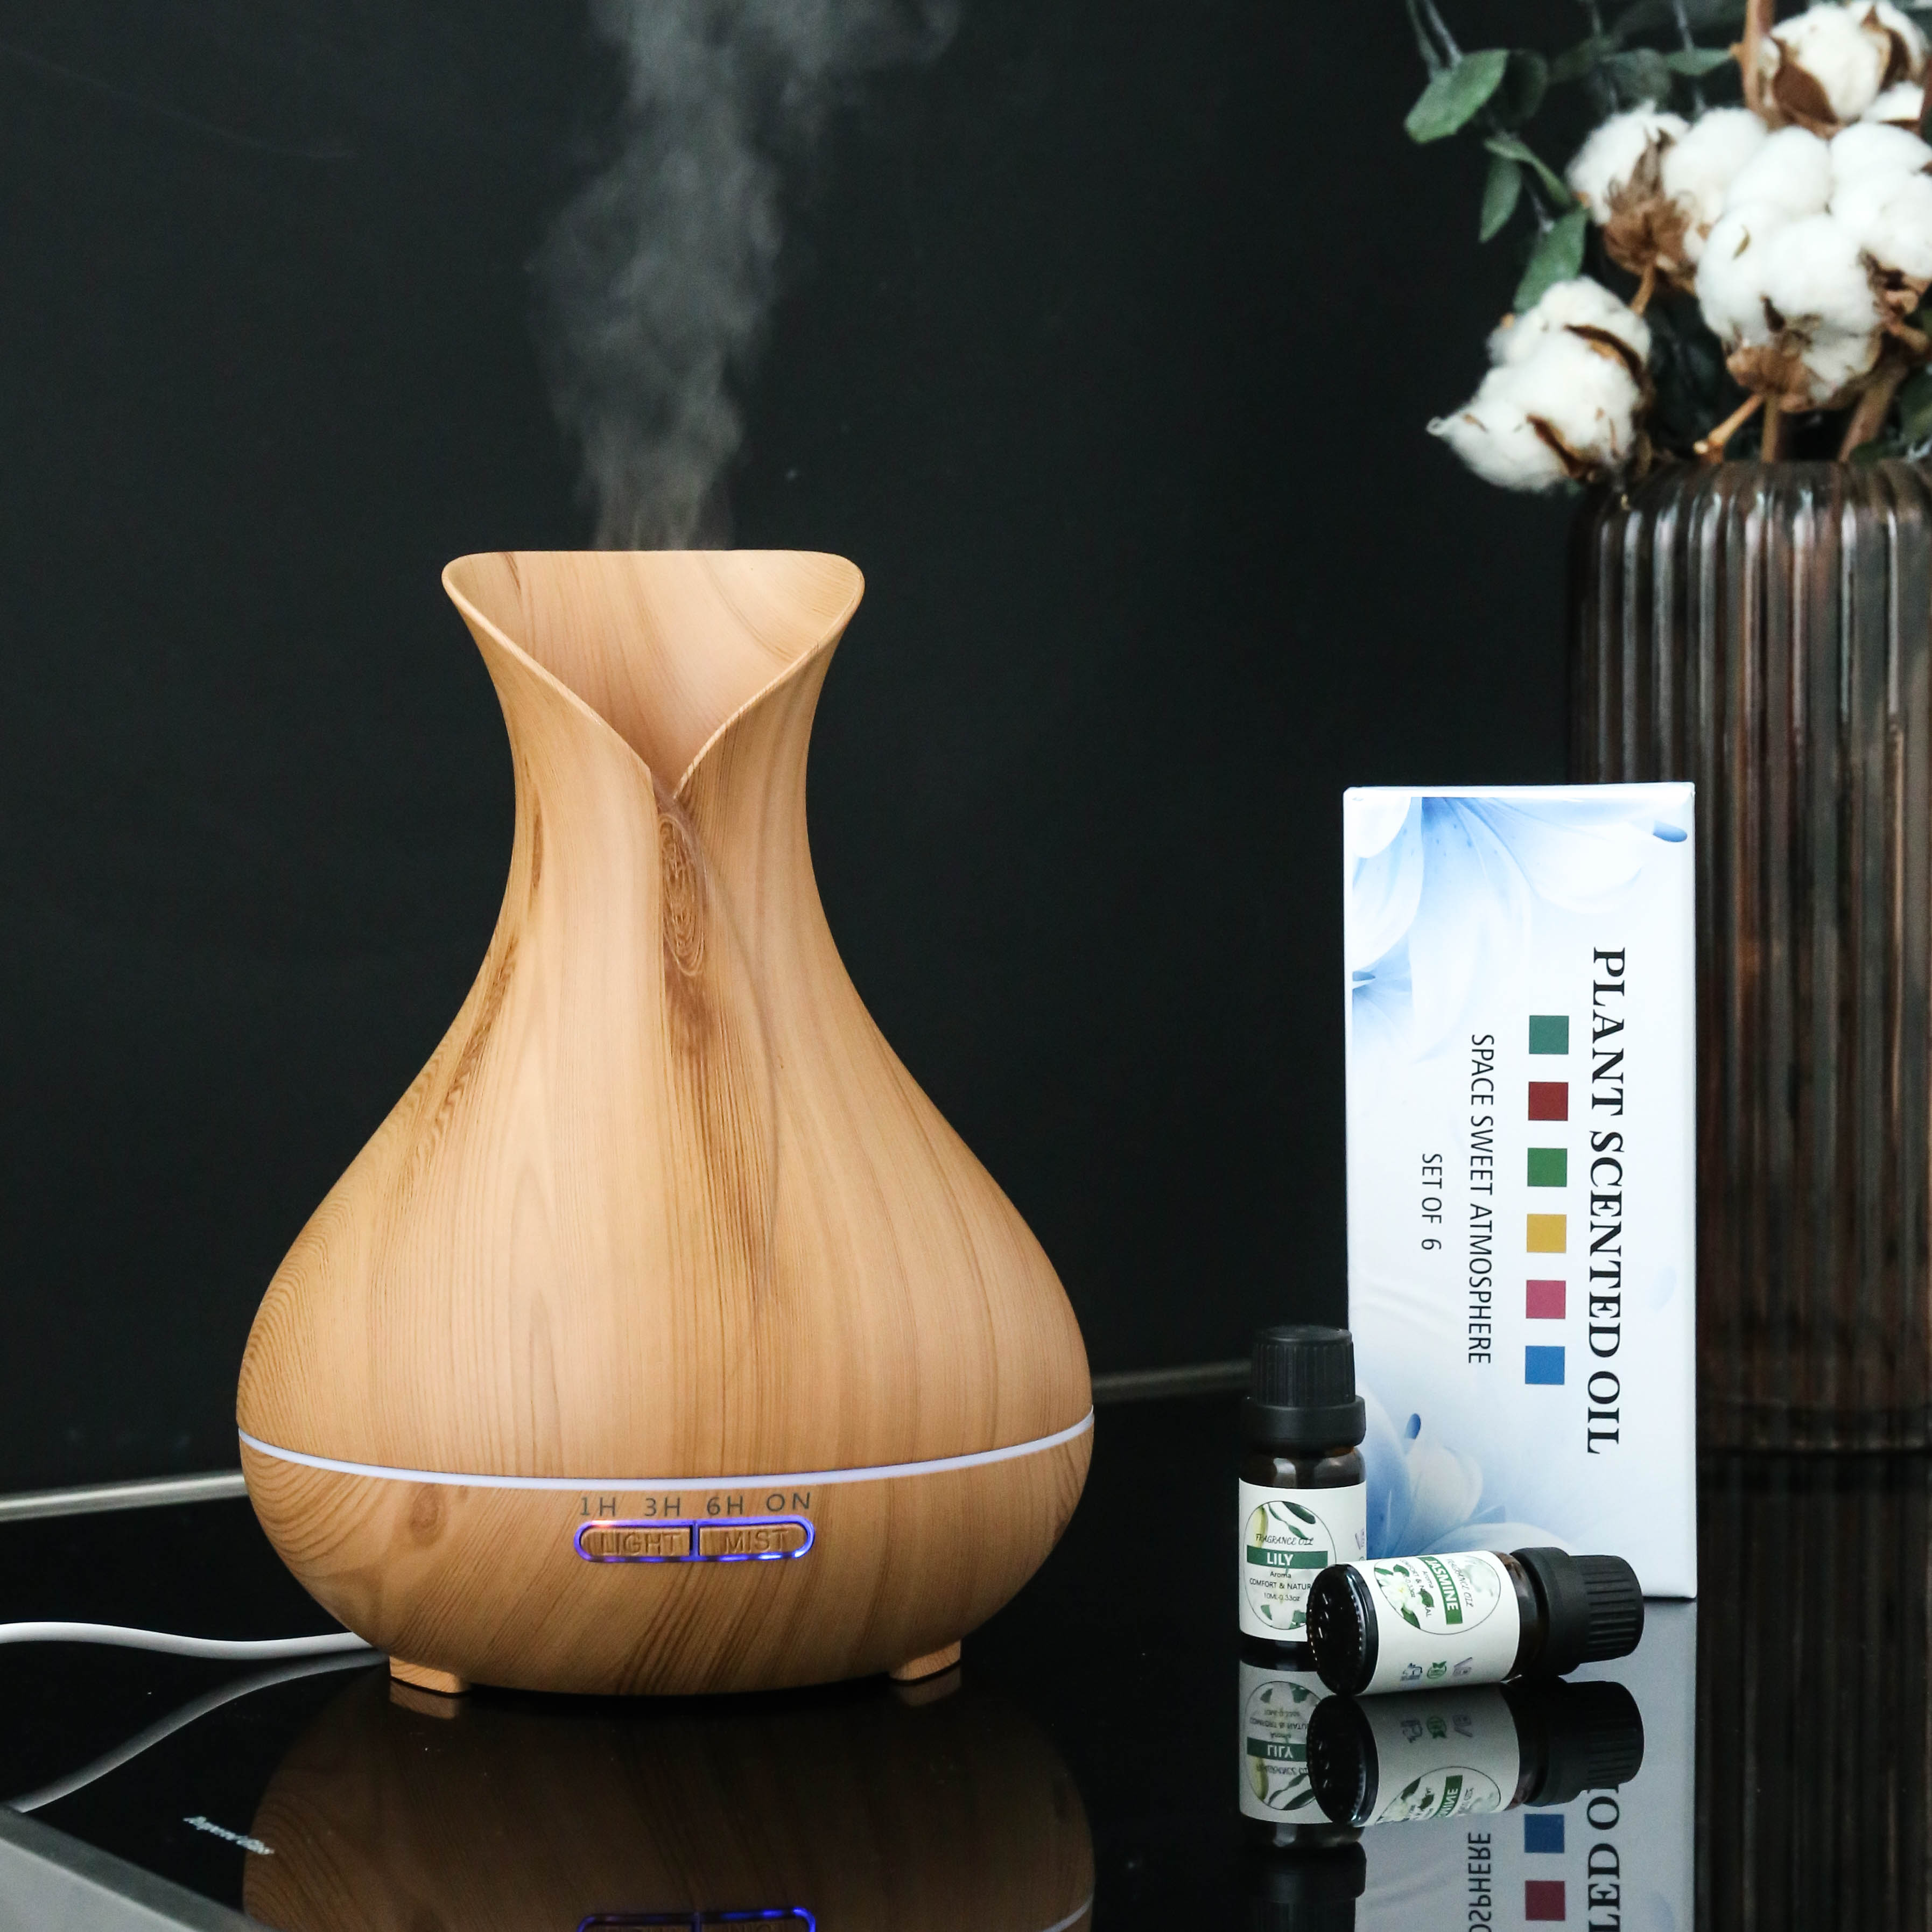 Fragrance diffuser how to use,How to use fragrance diffuser and essential oil diffuser correctly